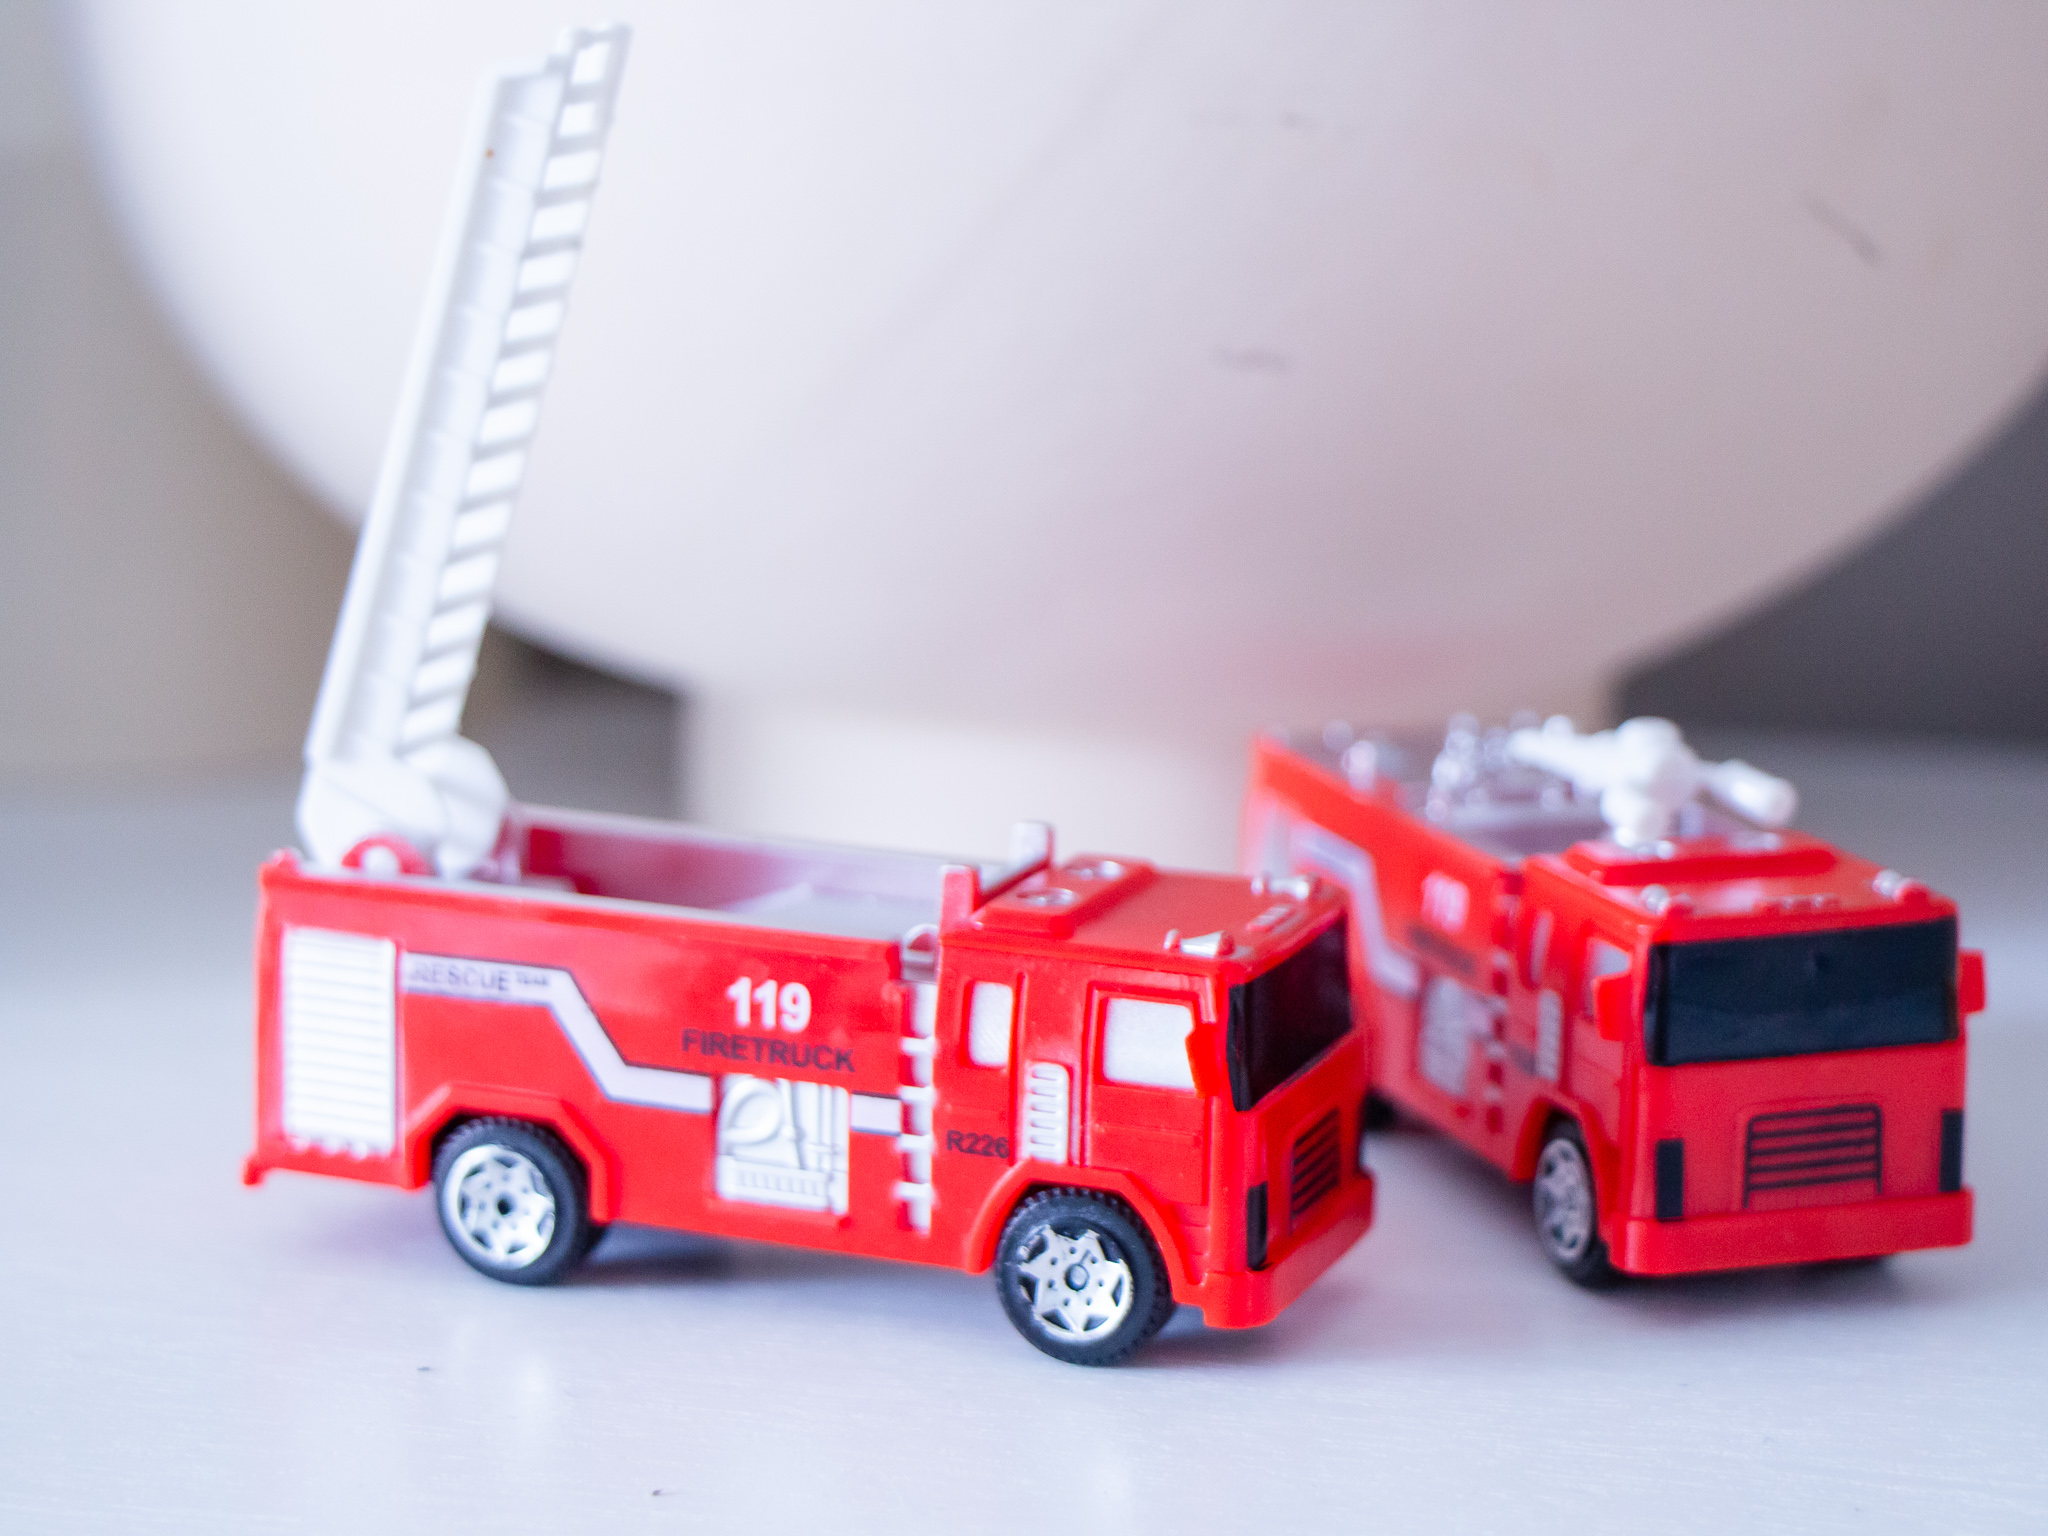 Fire Truck Toddler Birthday Party: 3 Tips for a Memorable Celebration